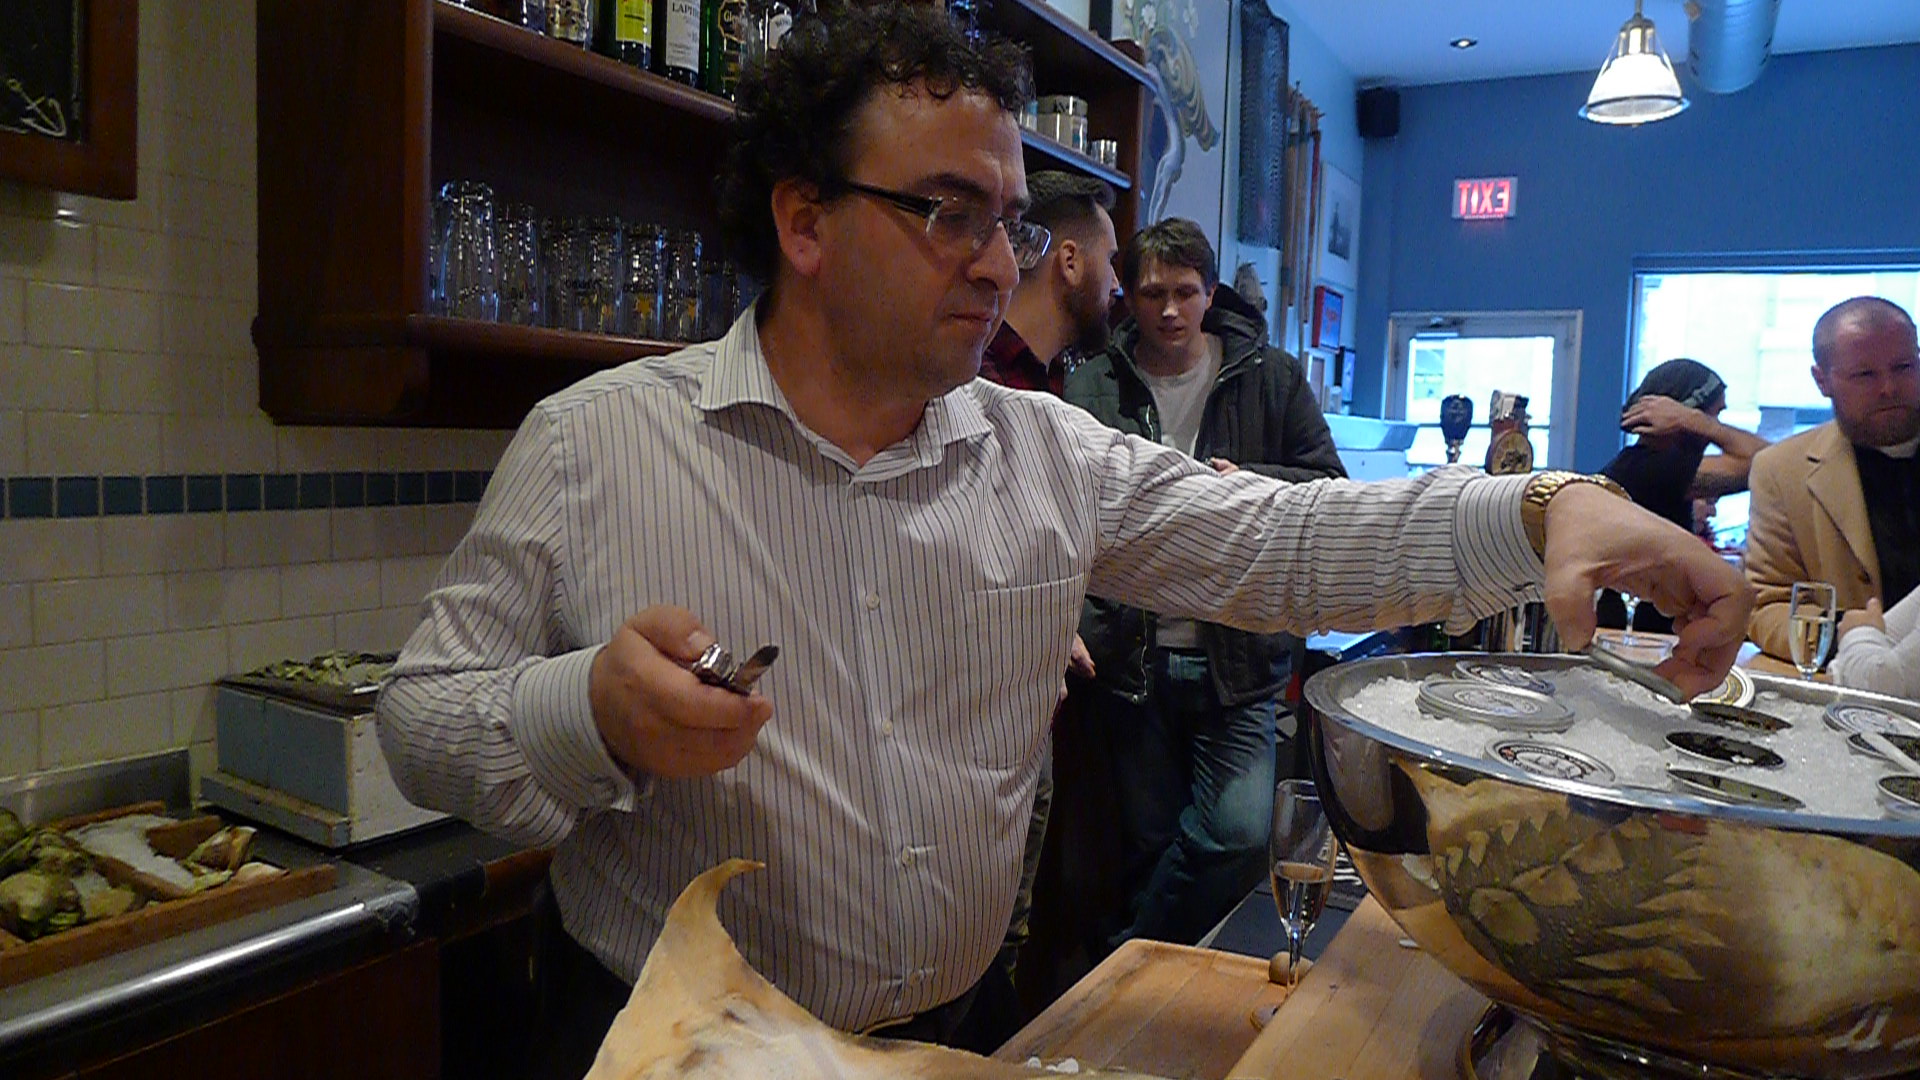 Cornel from Acadian Sturgeon dishing out his new lines to some lucky folks at Toronto's Oyster Boy.